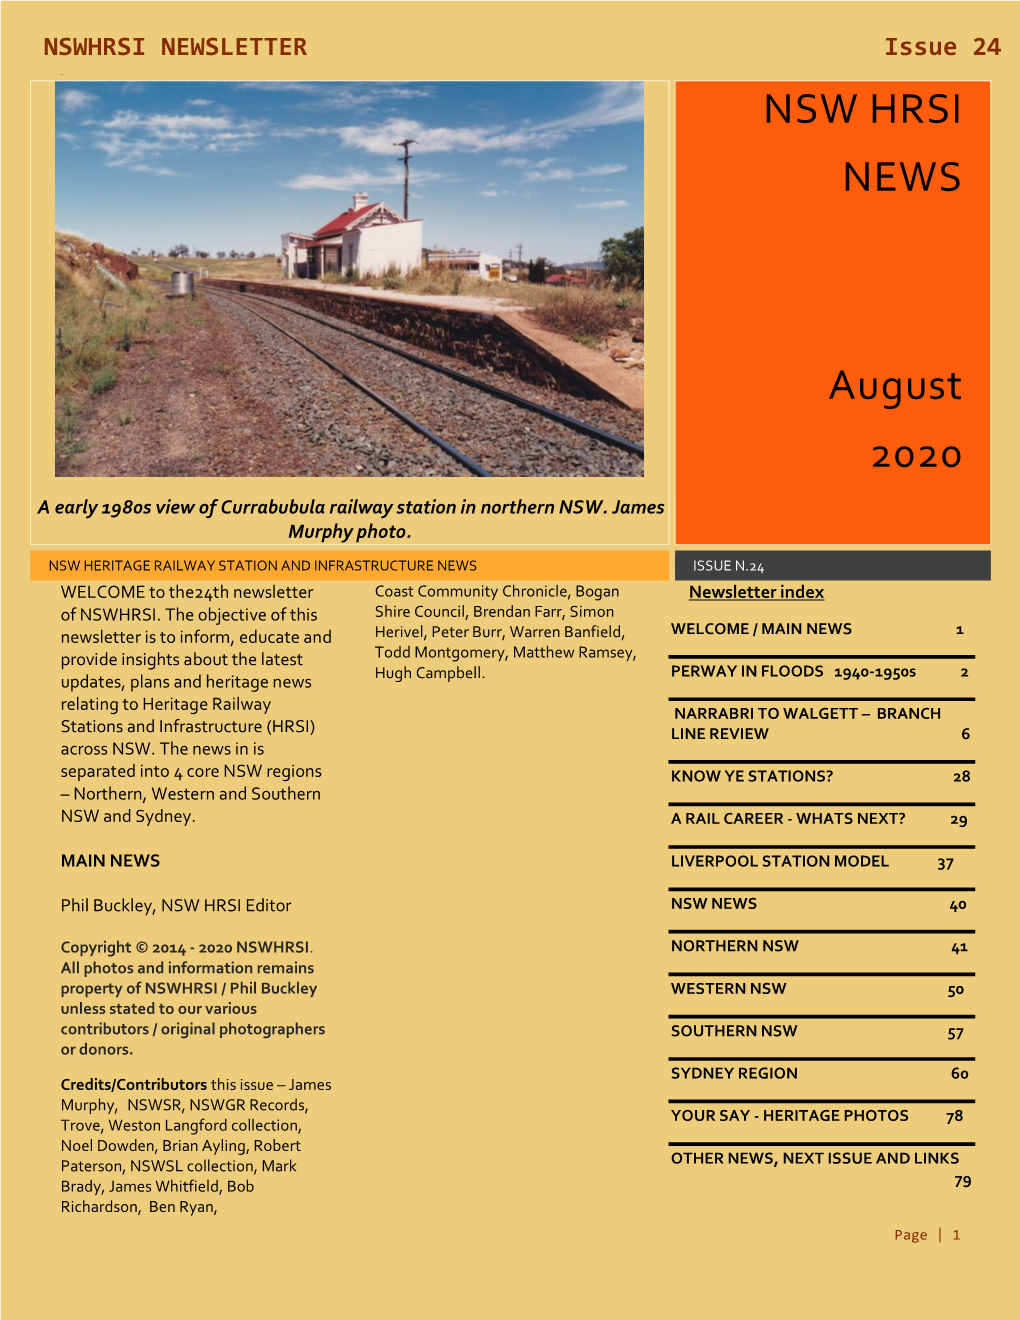 NSW HRSI NEWS August 2020